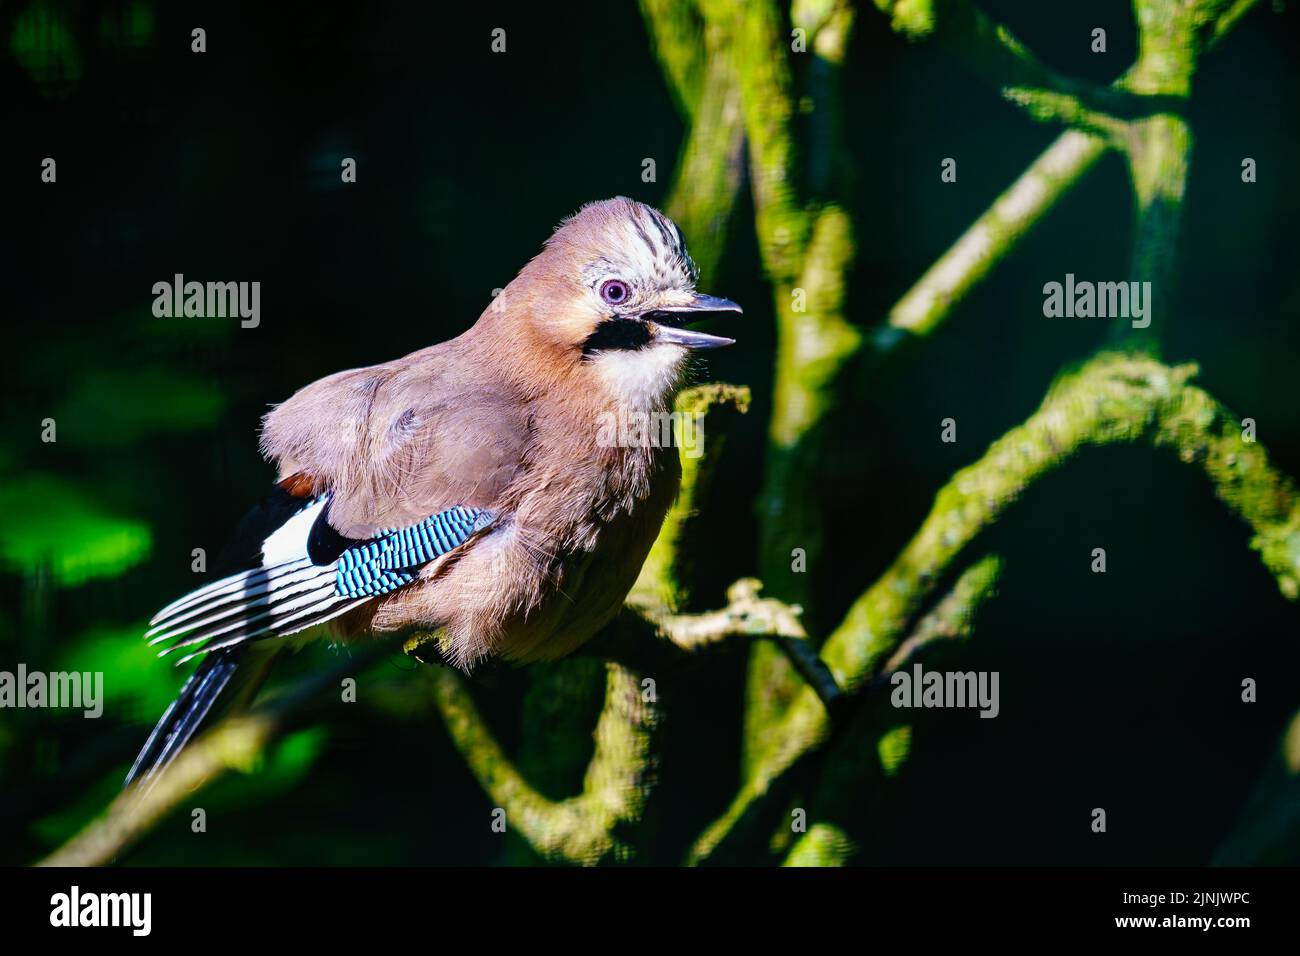 Brightly colored bird on a tree branch on a black background. Stock Photo